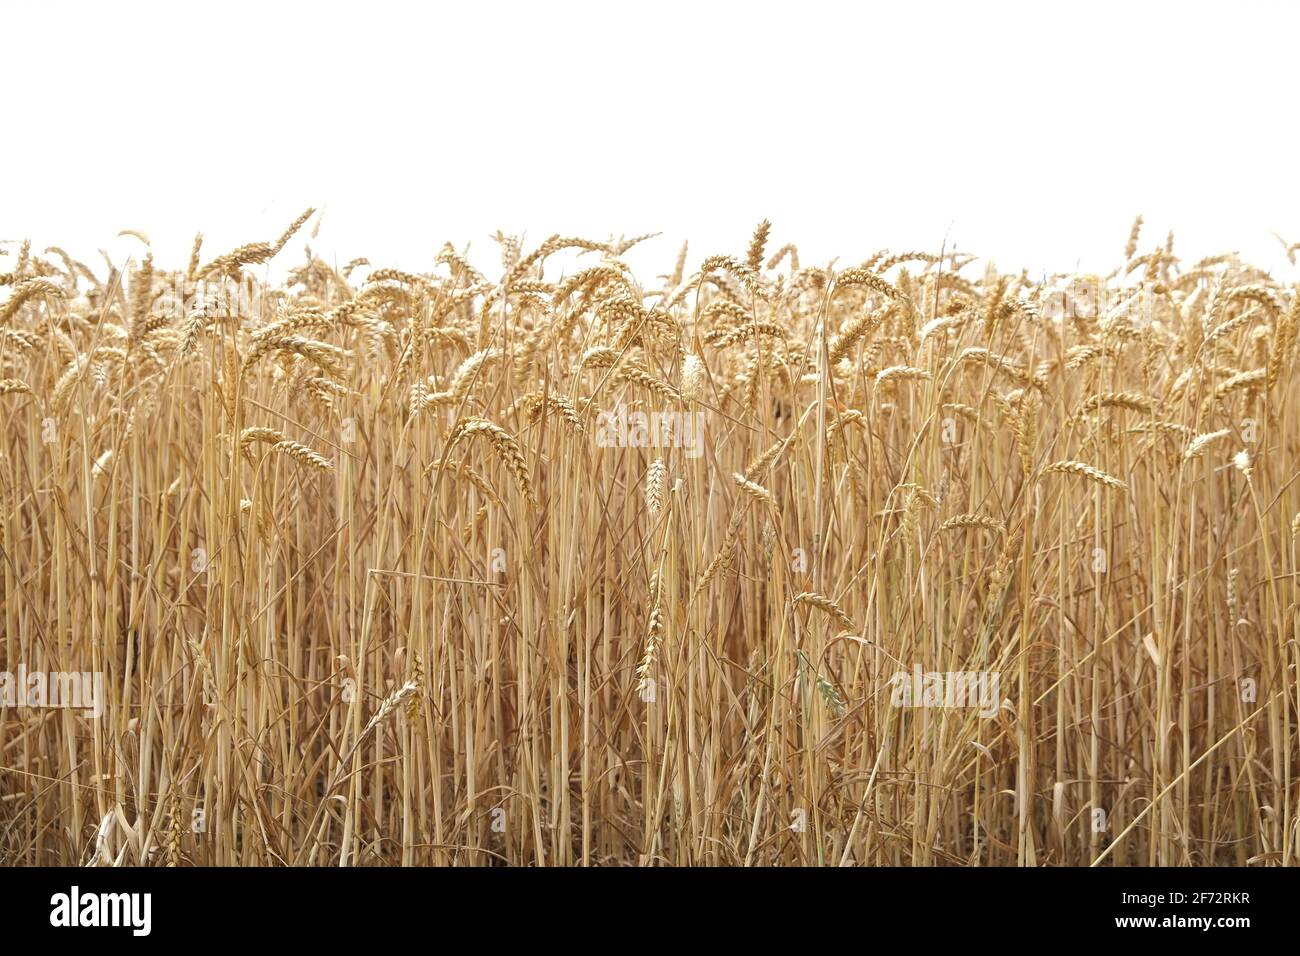 a crfoss section photograph showing the inside of a crop of wheat ready to be harvested. Stock Photo